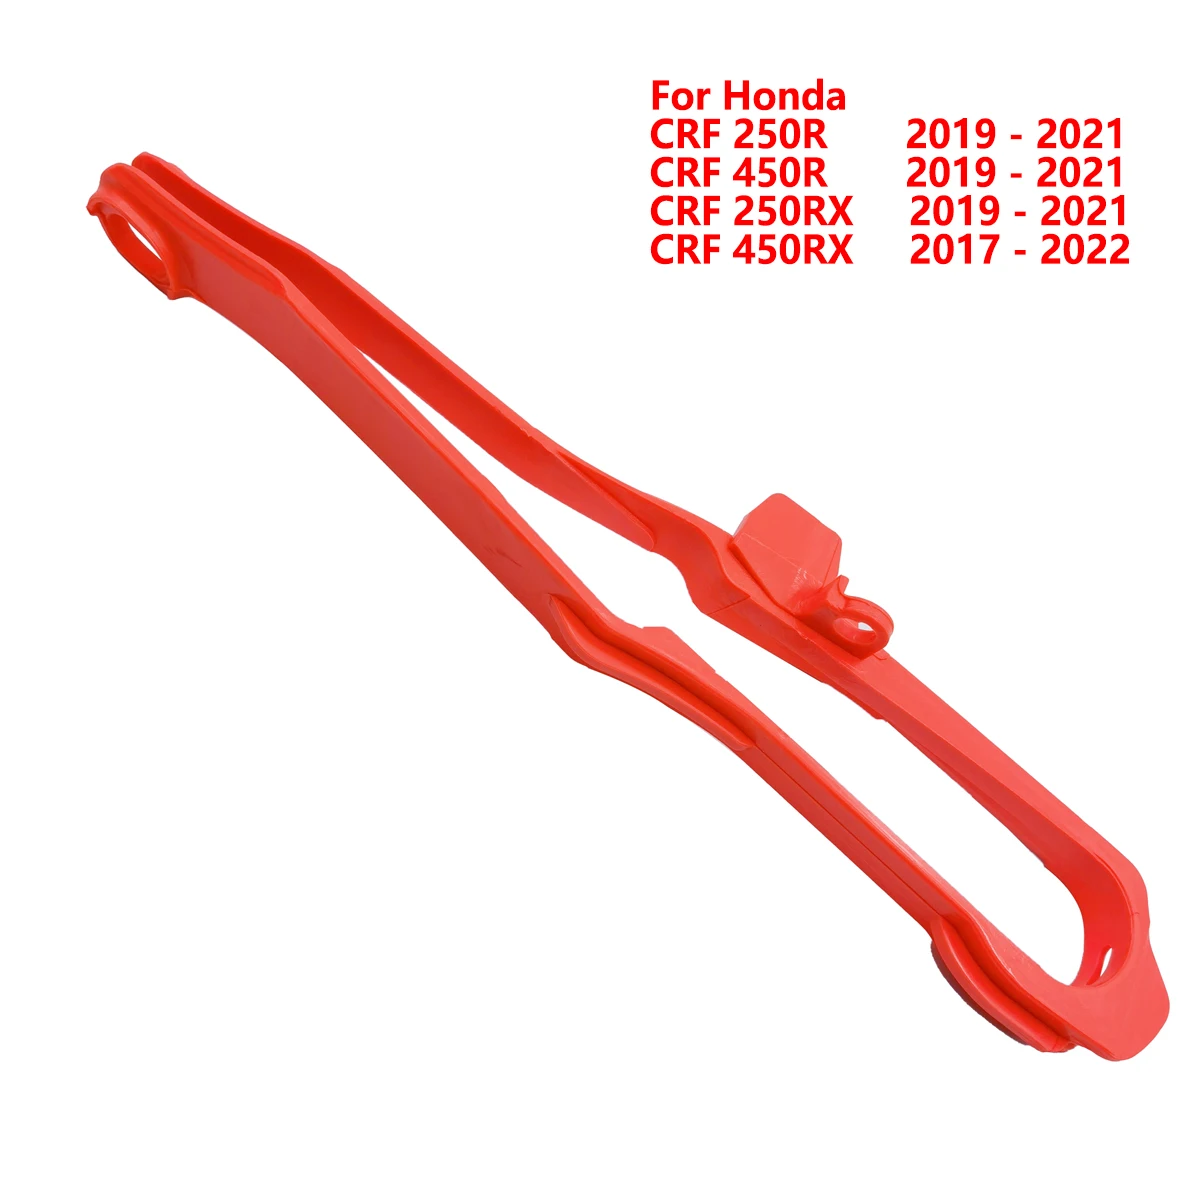 Motorcycle Plastic Swingarm Protector Chain Slider Guide For Honda CRF250R CRF450R CRF250RX CRF450RX CRF 250 450 R/RX 2017-2021